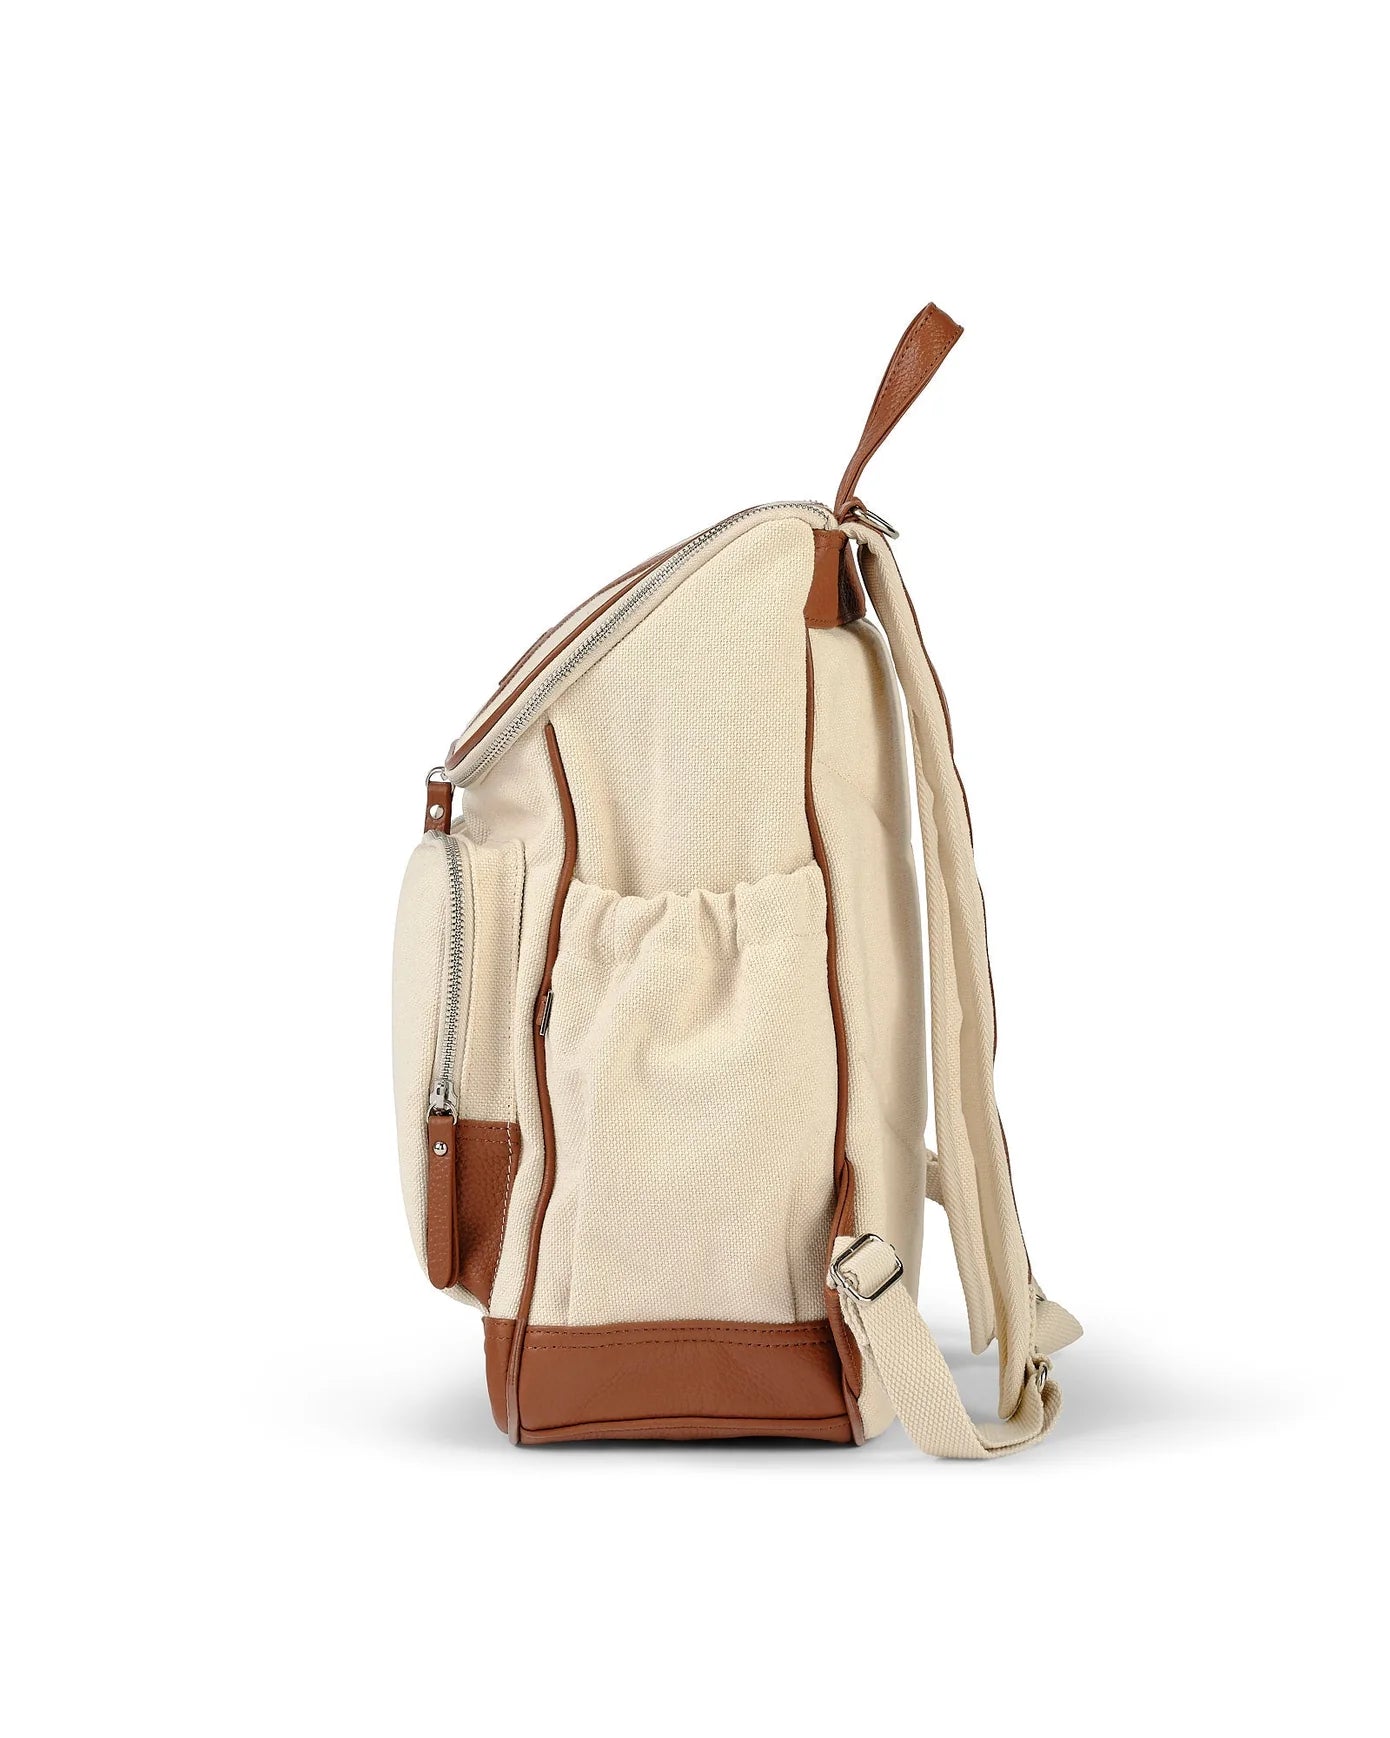 OiOi Signature Nappy Backpack - Natural Canvas Backpacks OiOi 